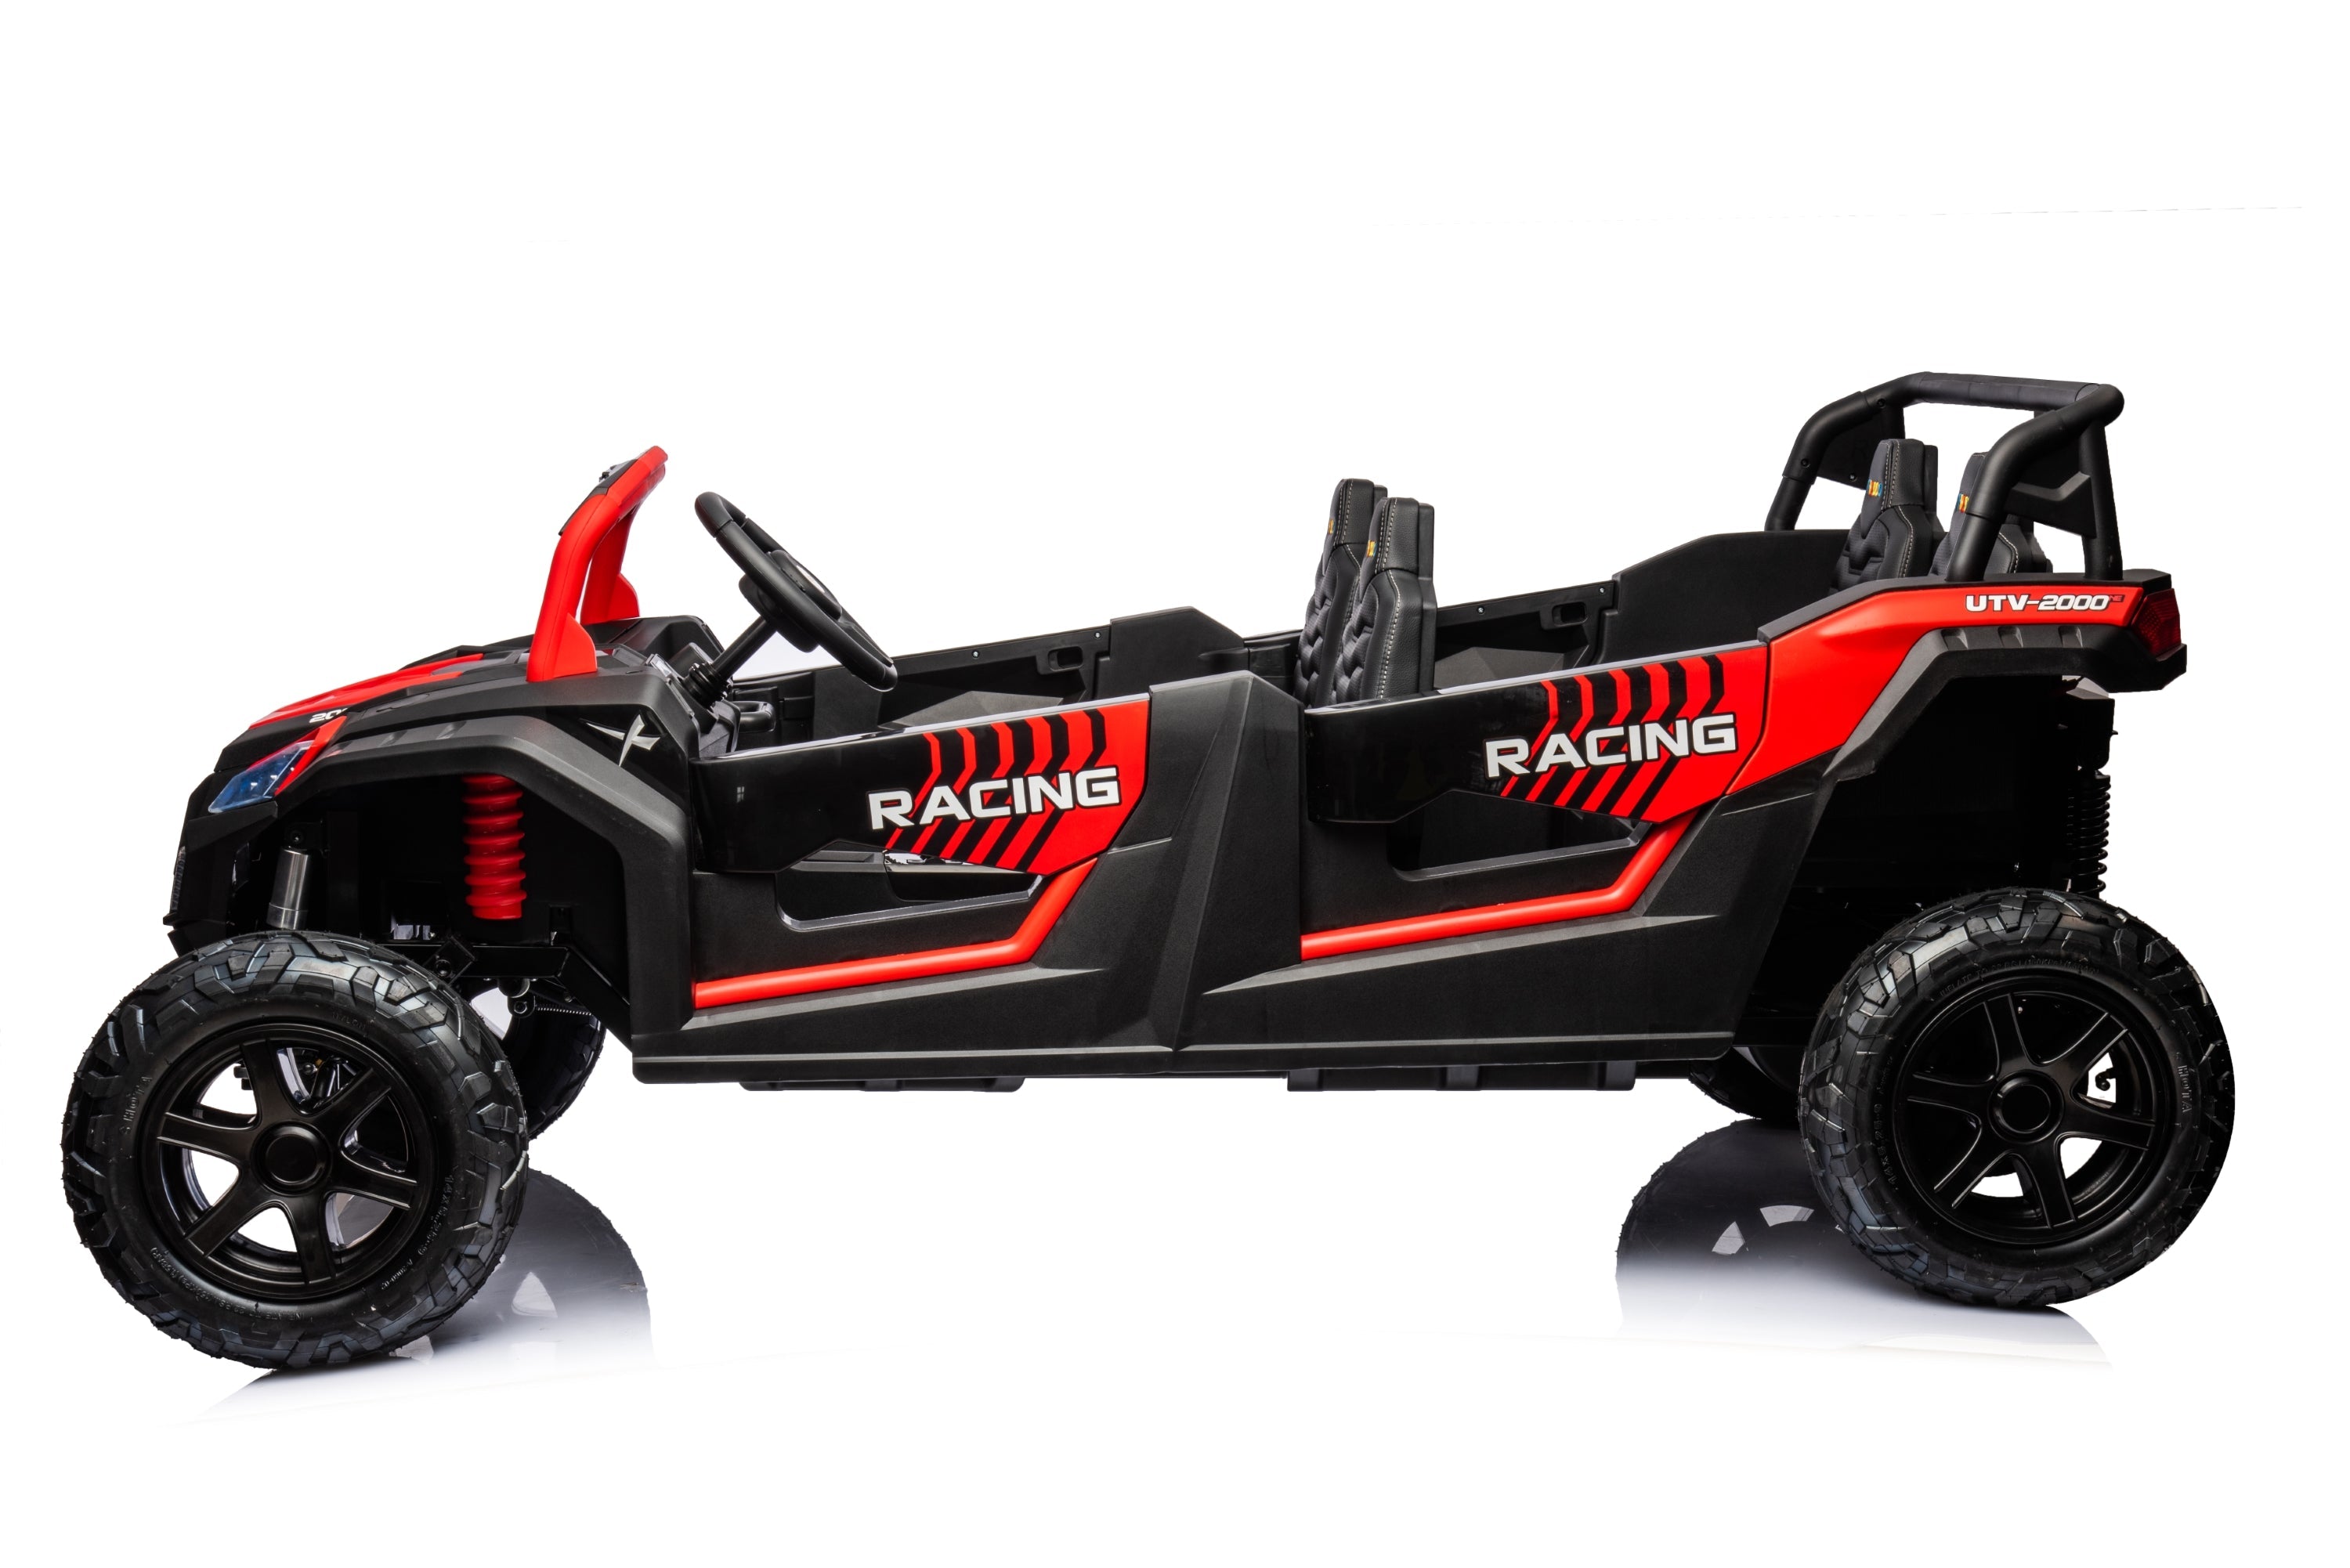 48V Freddo Beast XL: World's Fastest Kids' 4-Seater Dune Buggy with Advanced Brushless Motor & Precision Differential